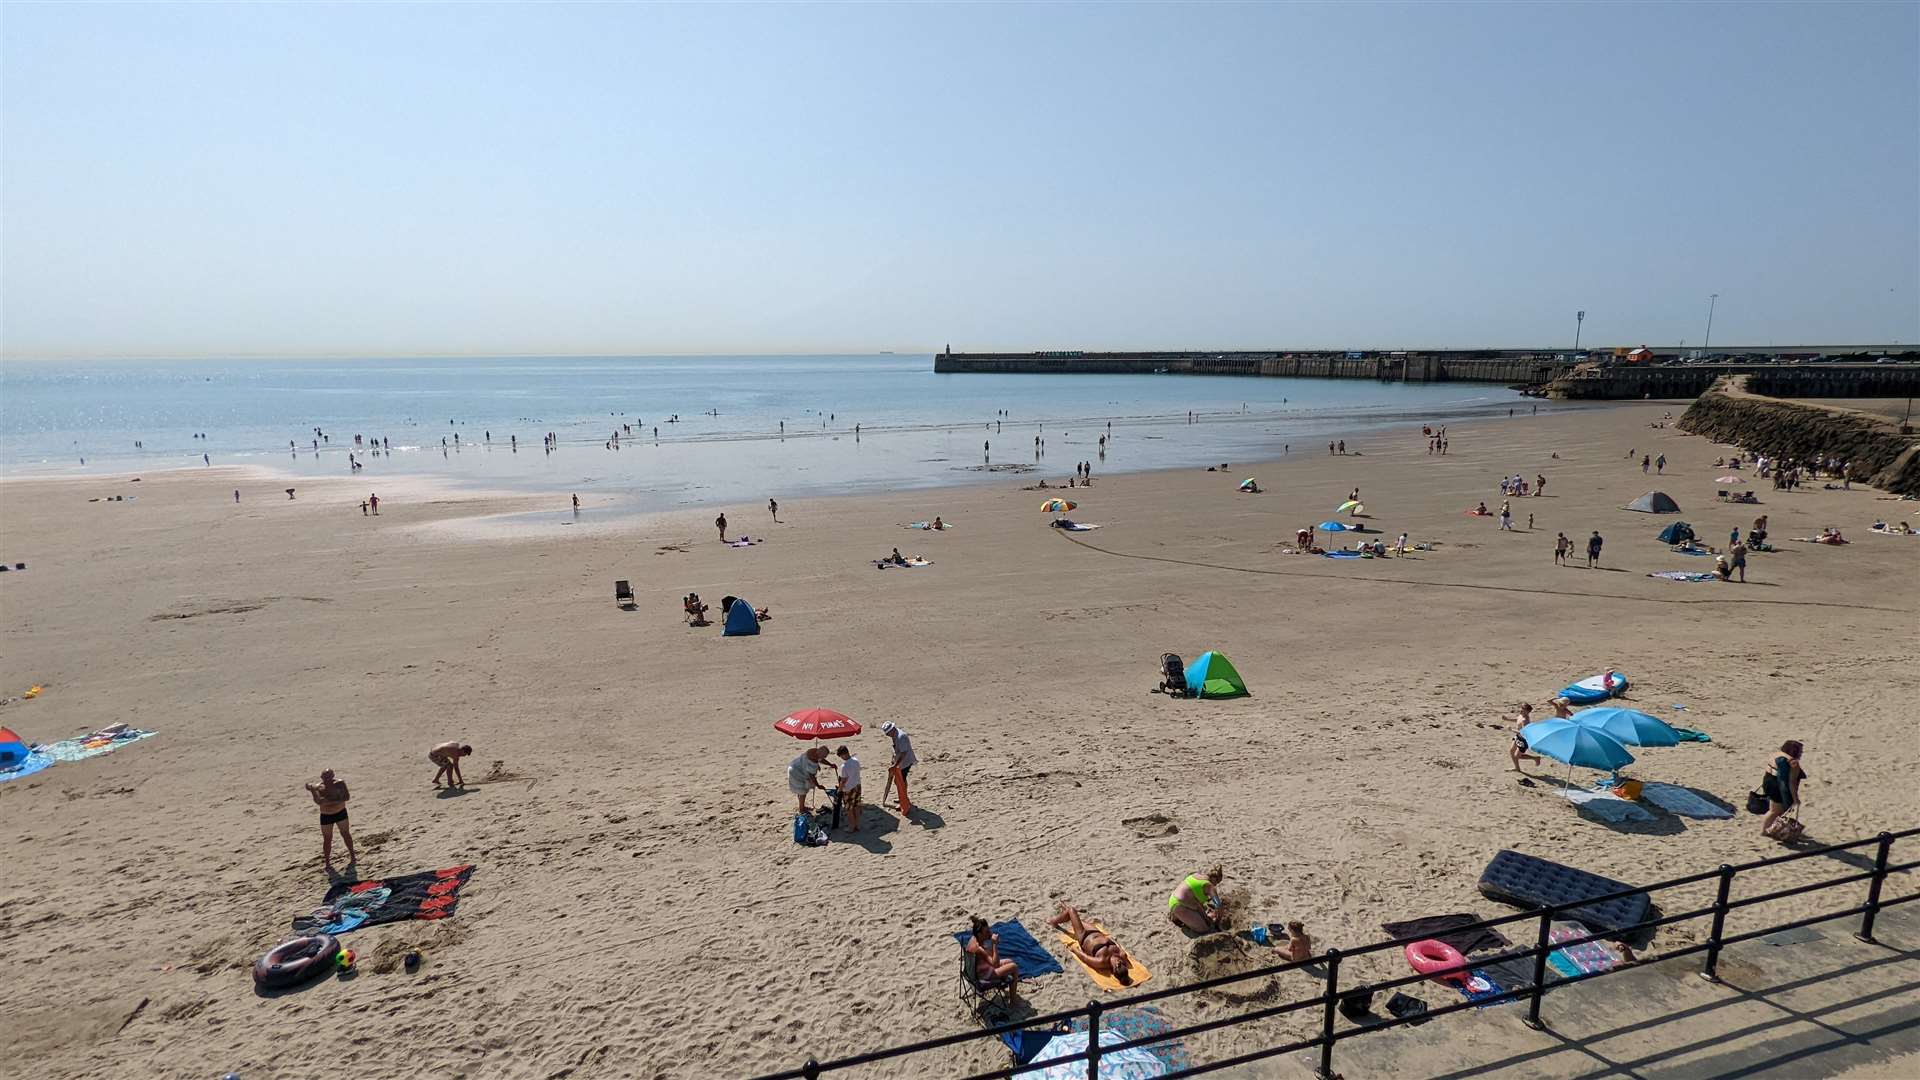 Folkestone, pictured during this summer's heatwave, is becoming an increasingly popular place to move to